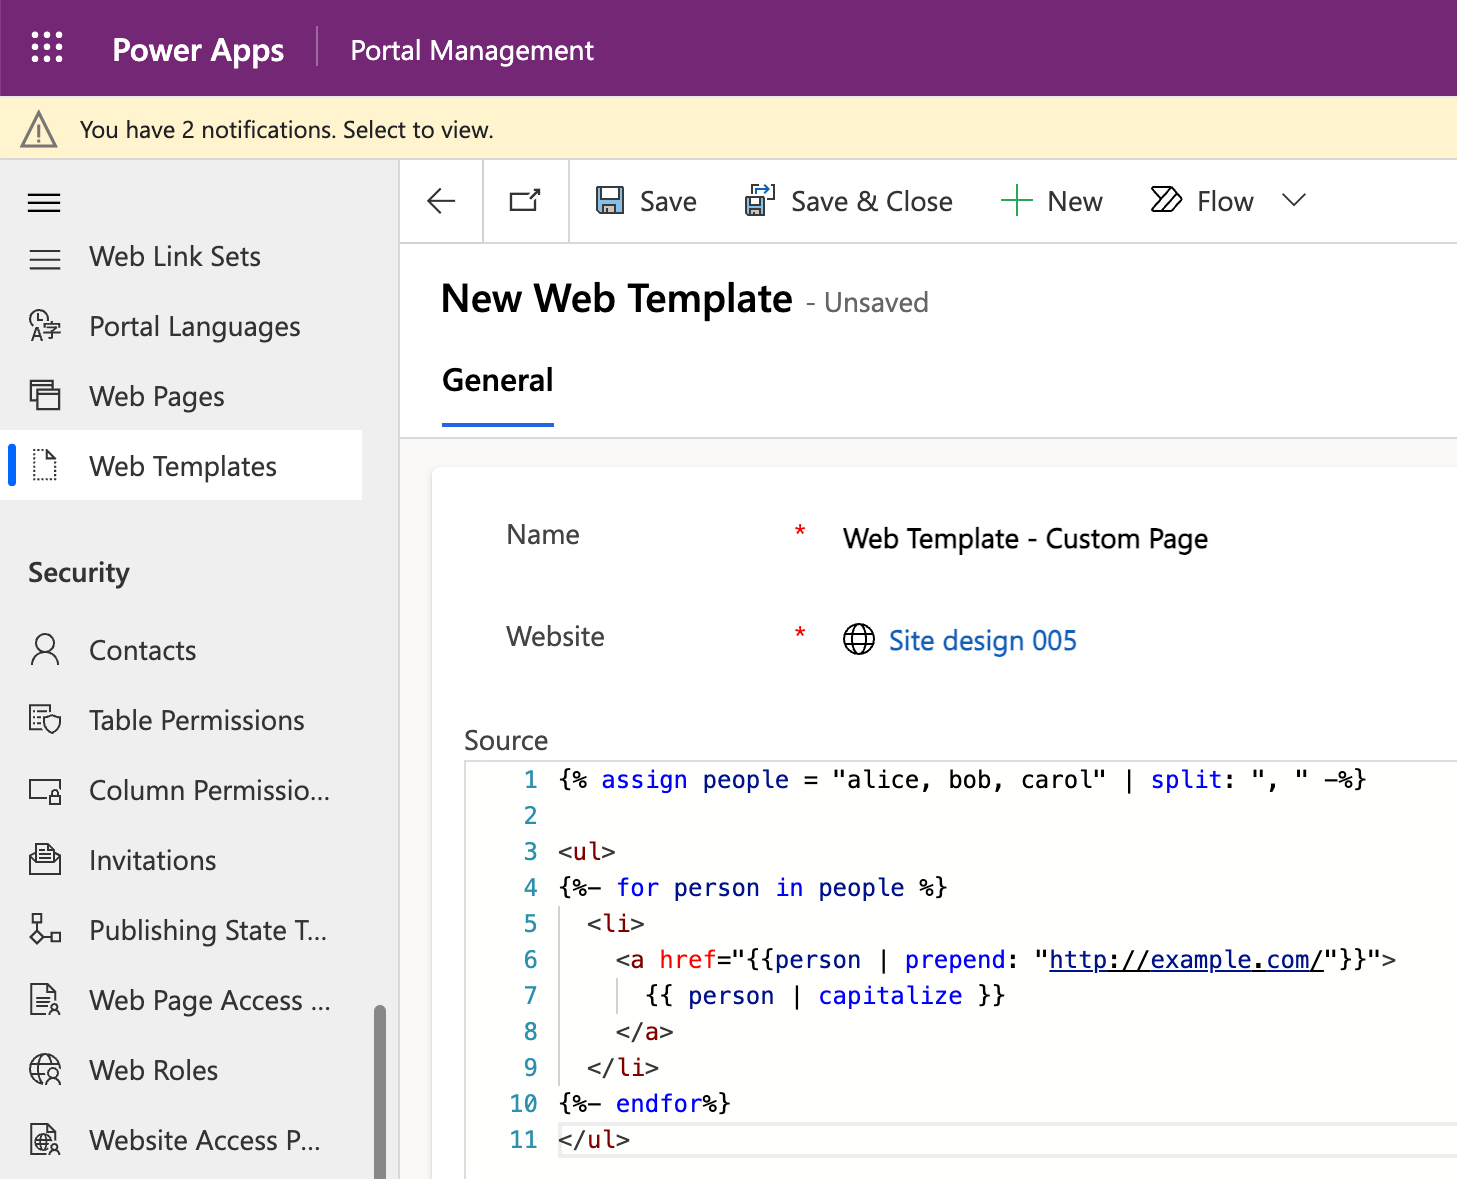 Screenshot of creating a web template using Liquid in the Portal Management app.